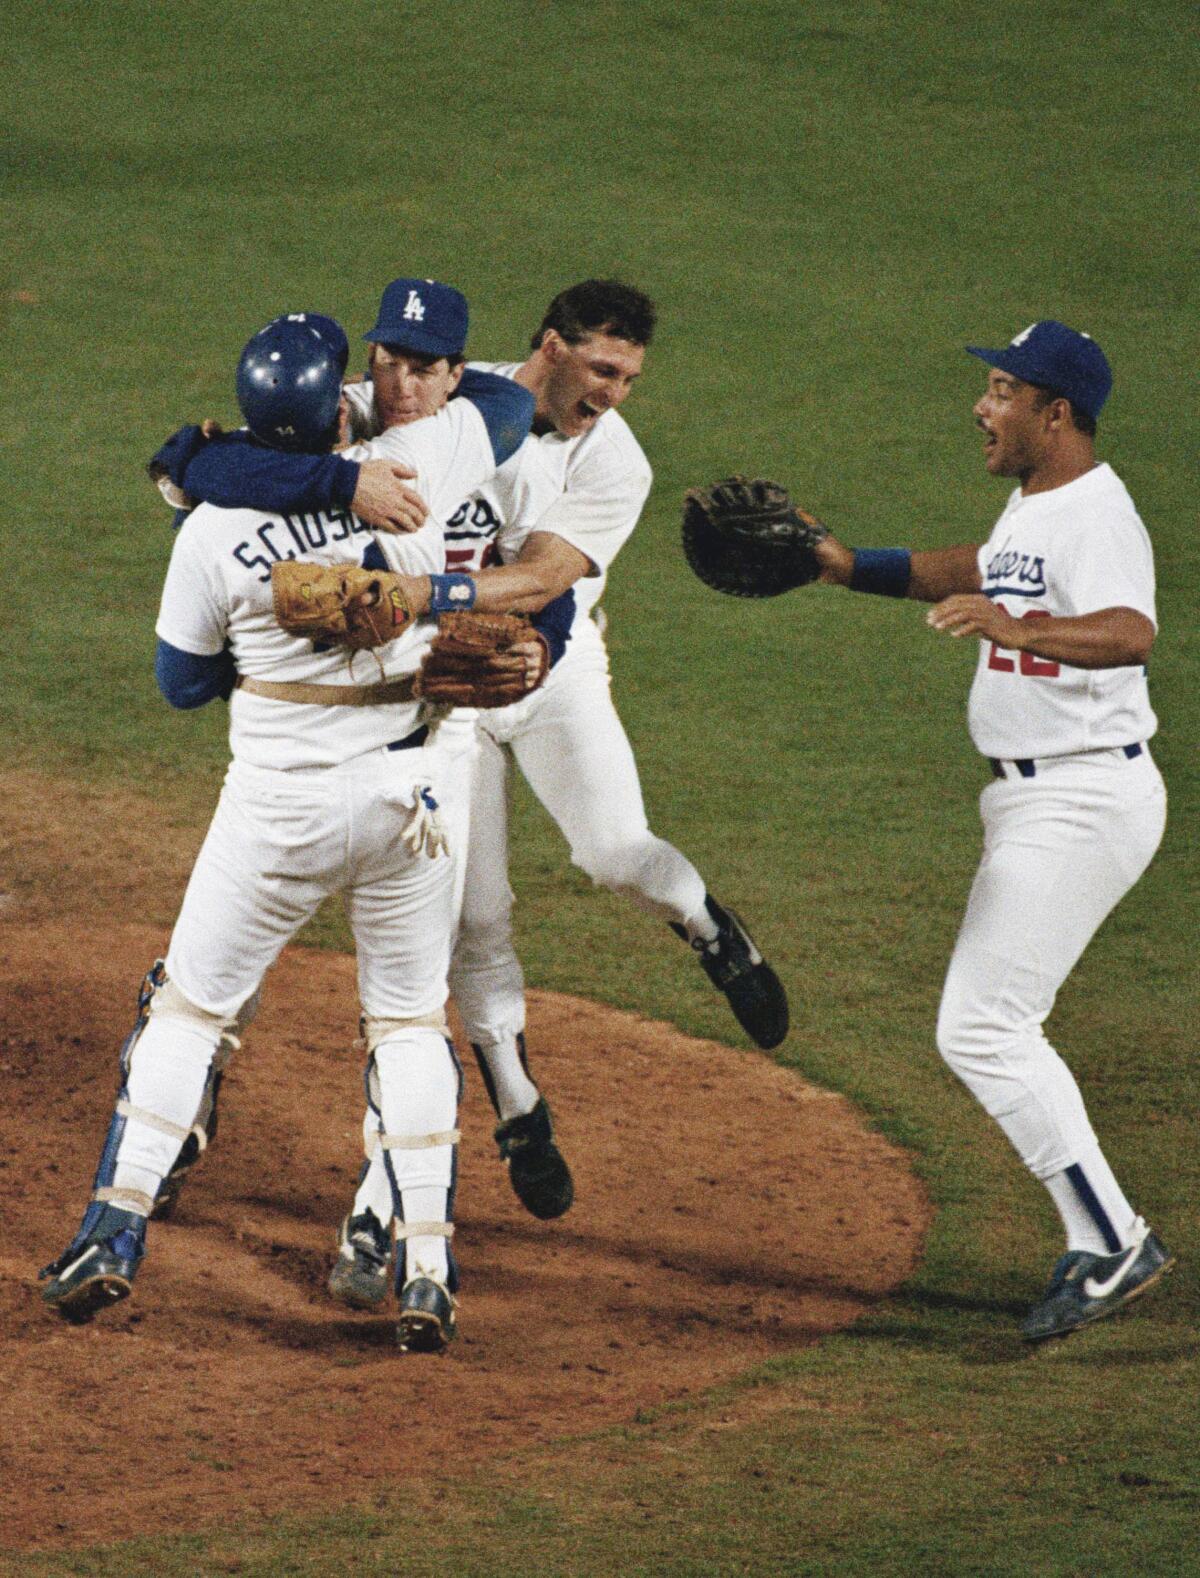 Dodgers pitcher Orel Hershiser, top left, celebrates with catcher Mike Scioscia and teammates Steve Sax and Franklin Stubbs.